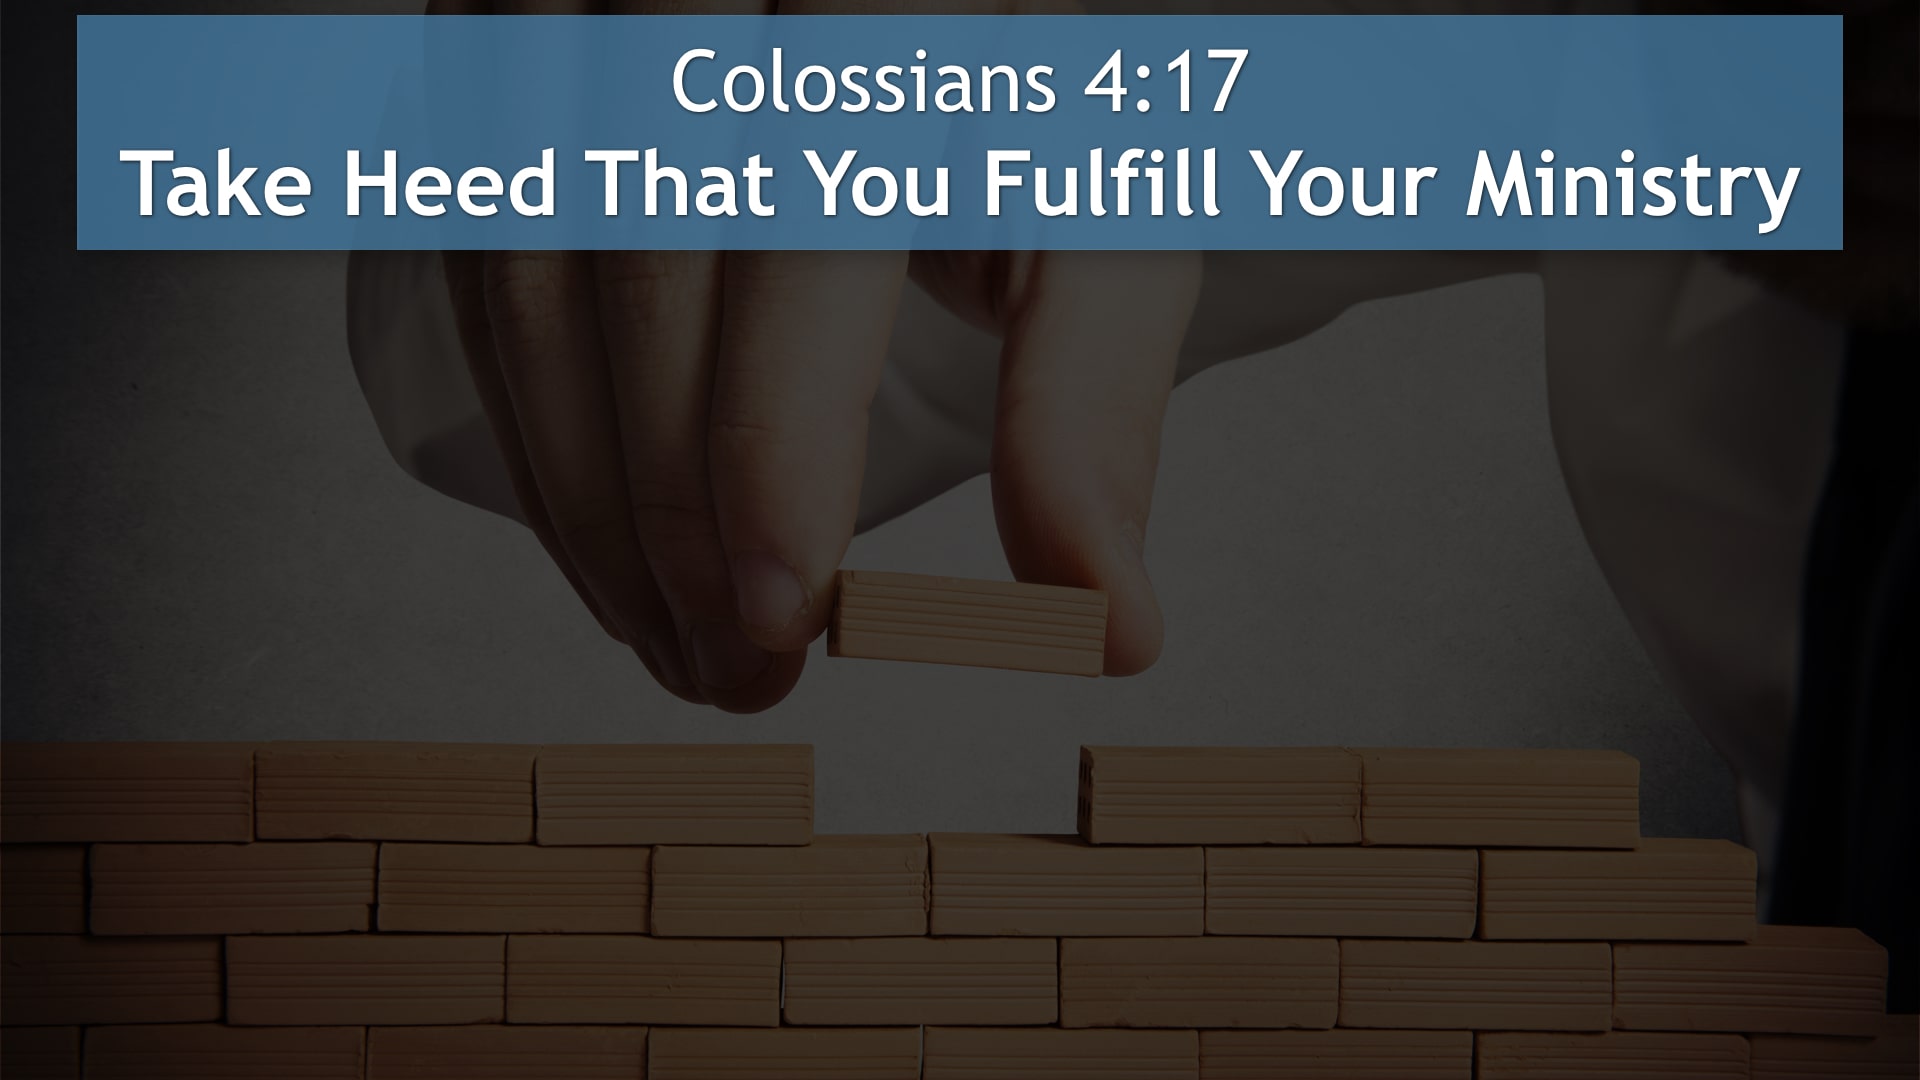 Jerry Simmons teaching Colossians 4:17, Take Heed That You Fulfill Your Ministry